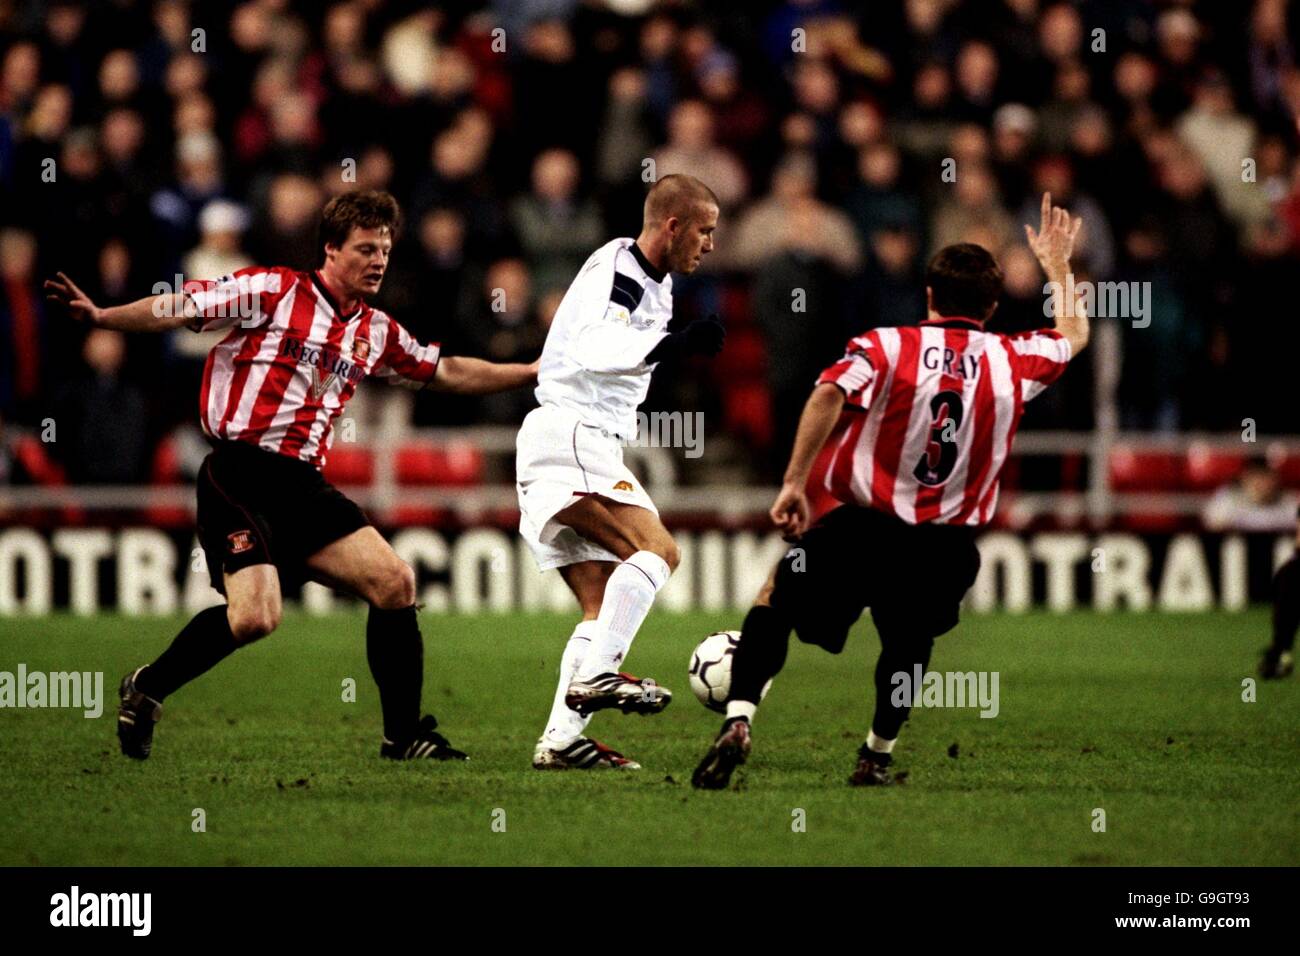 Manchester United's David Beckham (c) keeps the ball away from Sunderland's Stefan Schwarz (l) and Michael Gray (r) Stock Photo